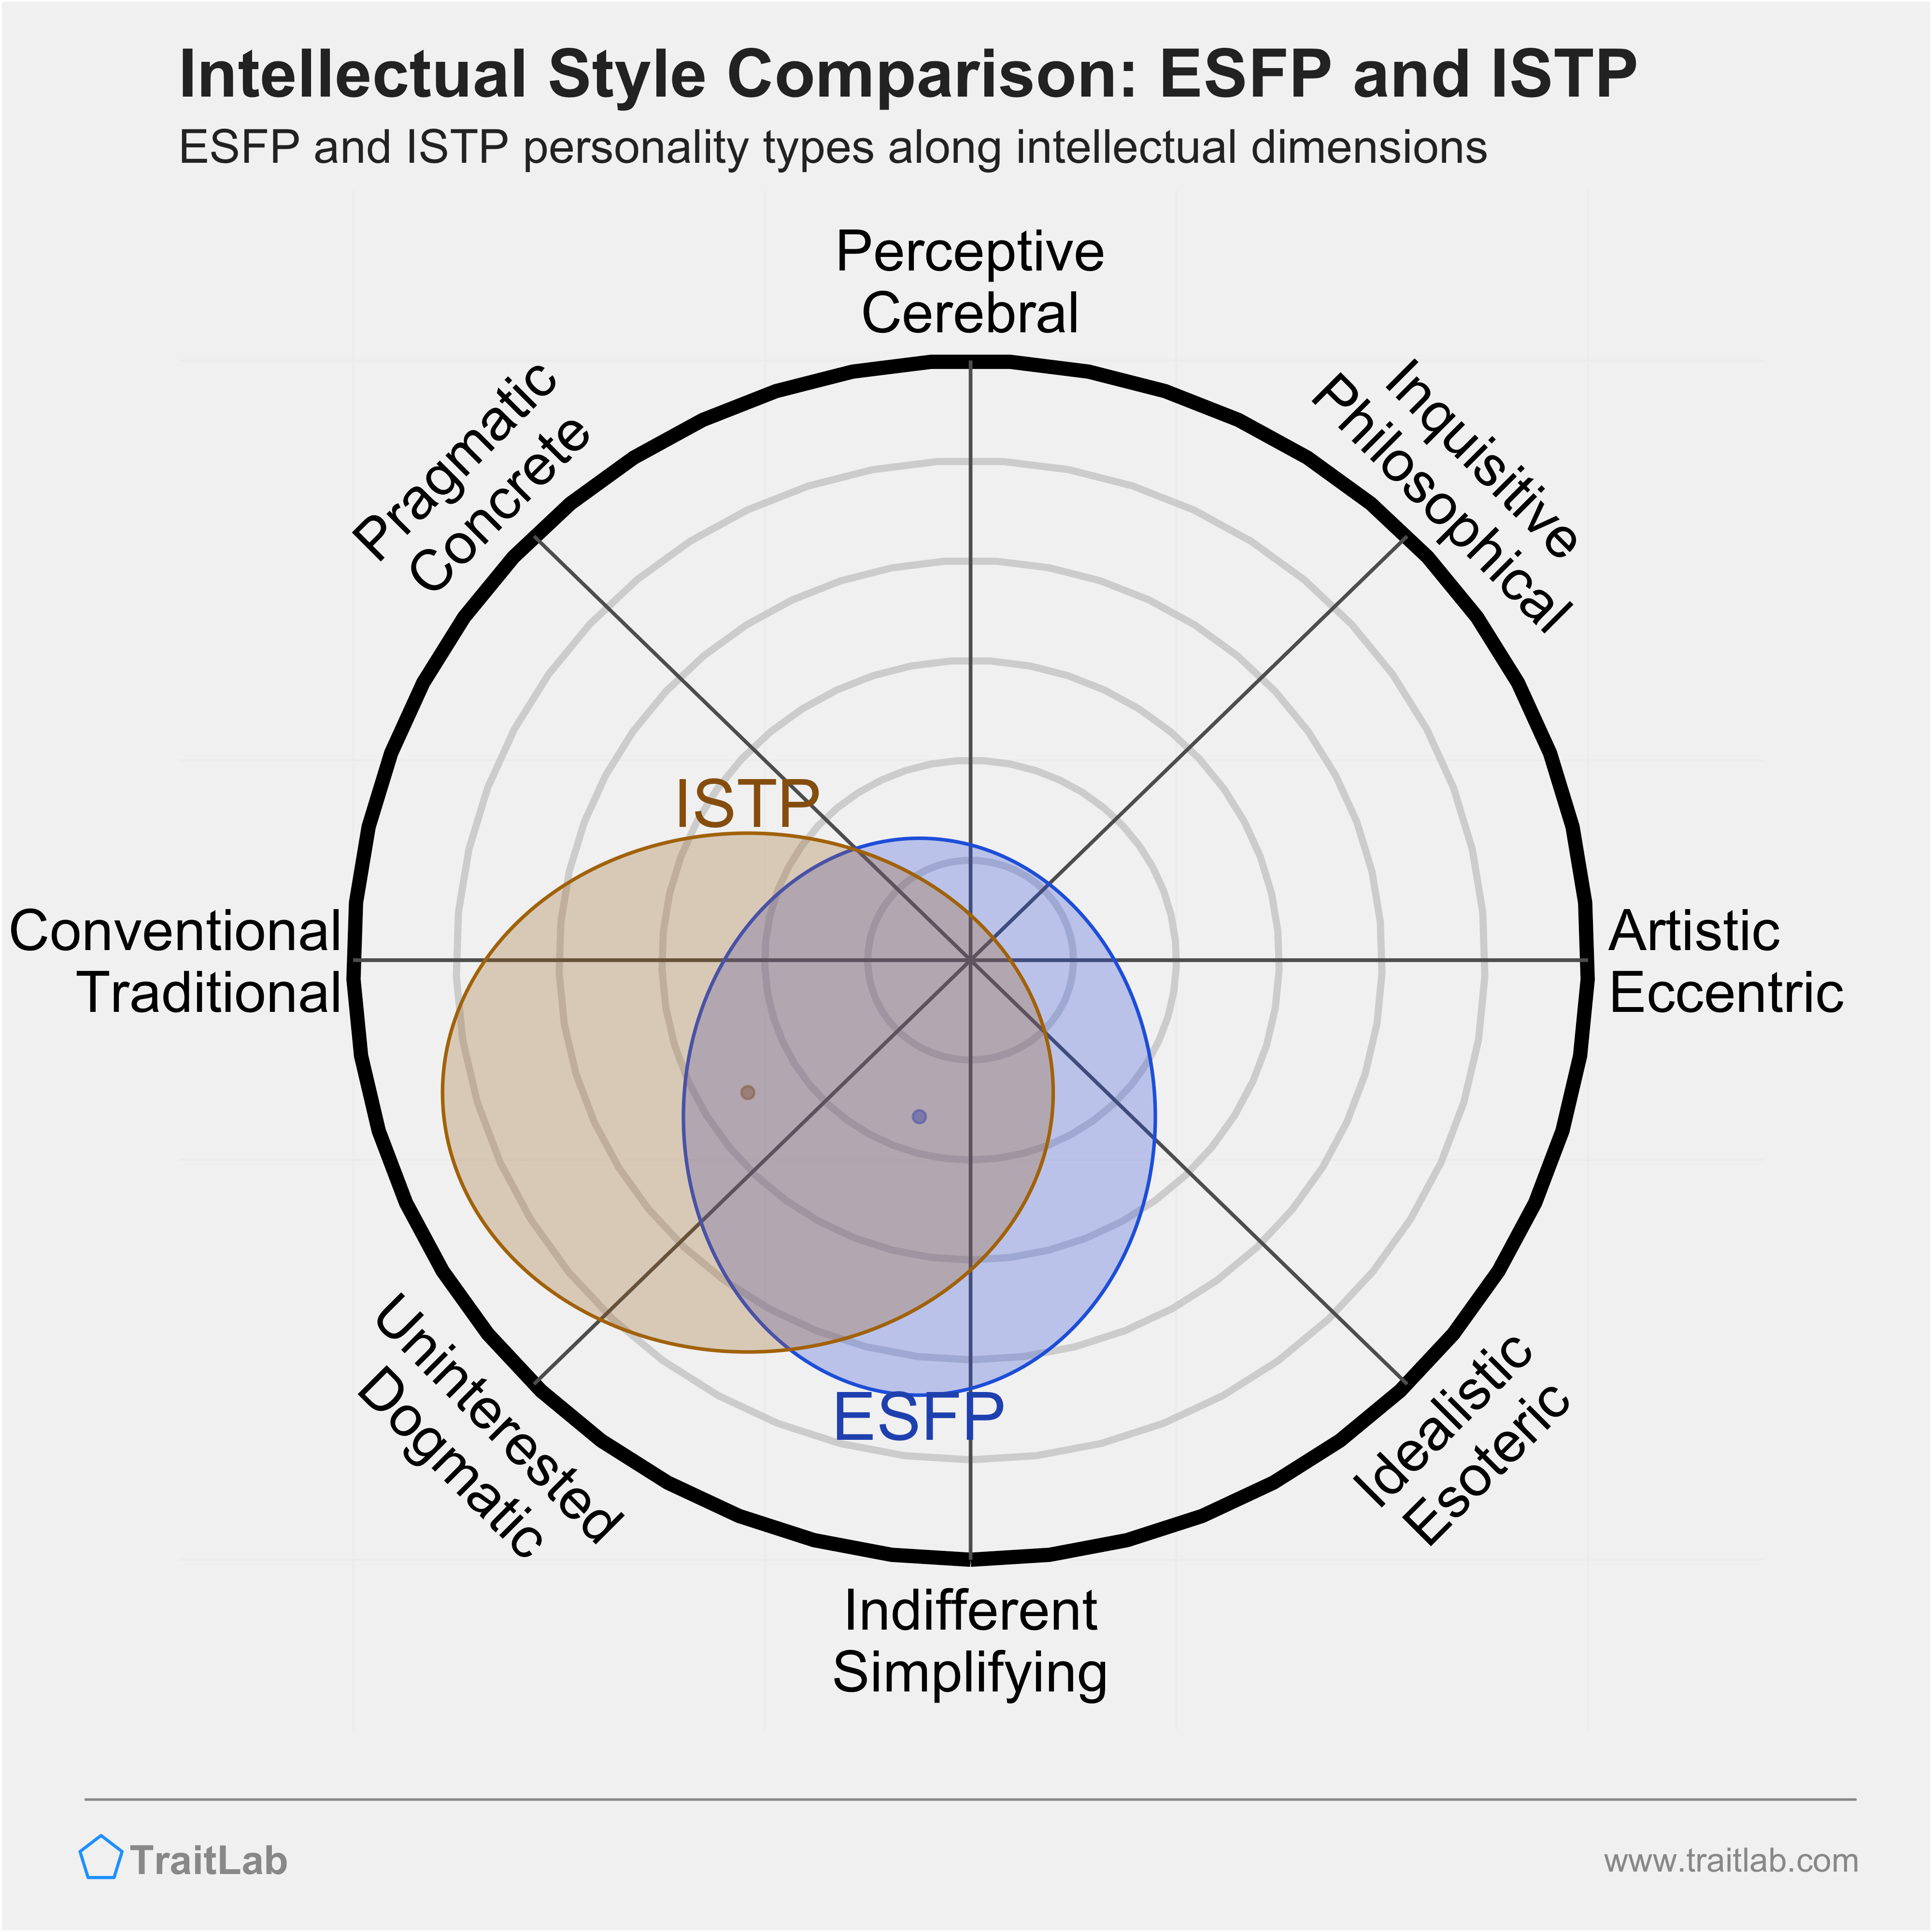 ESFP and ISTP comparison across intellectual dimensions